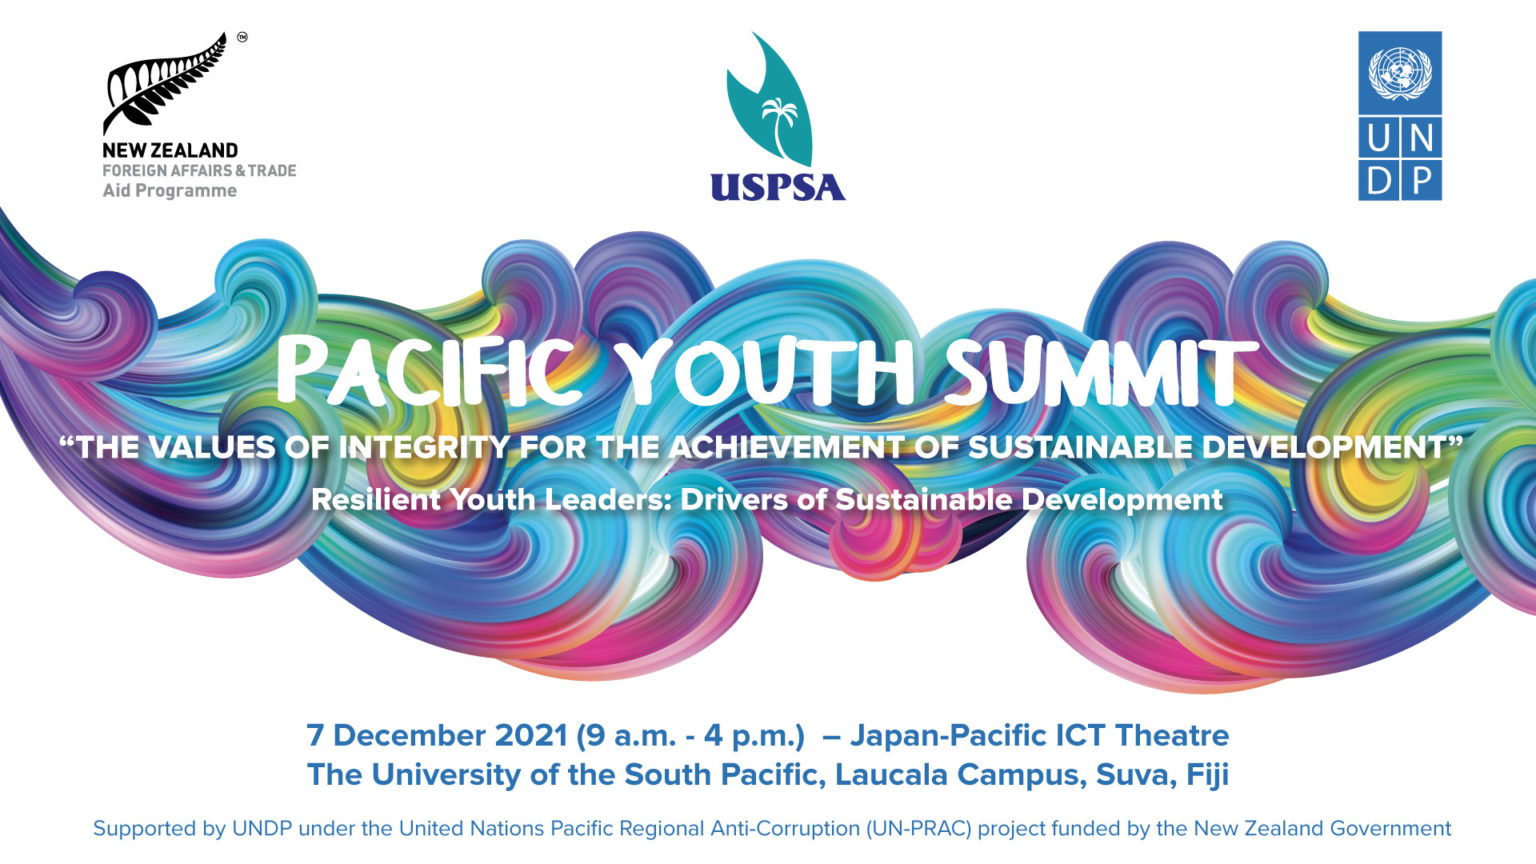 The Pacific Youth Summit The Values of Integrity for the Achievement